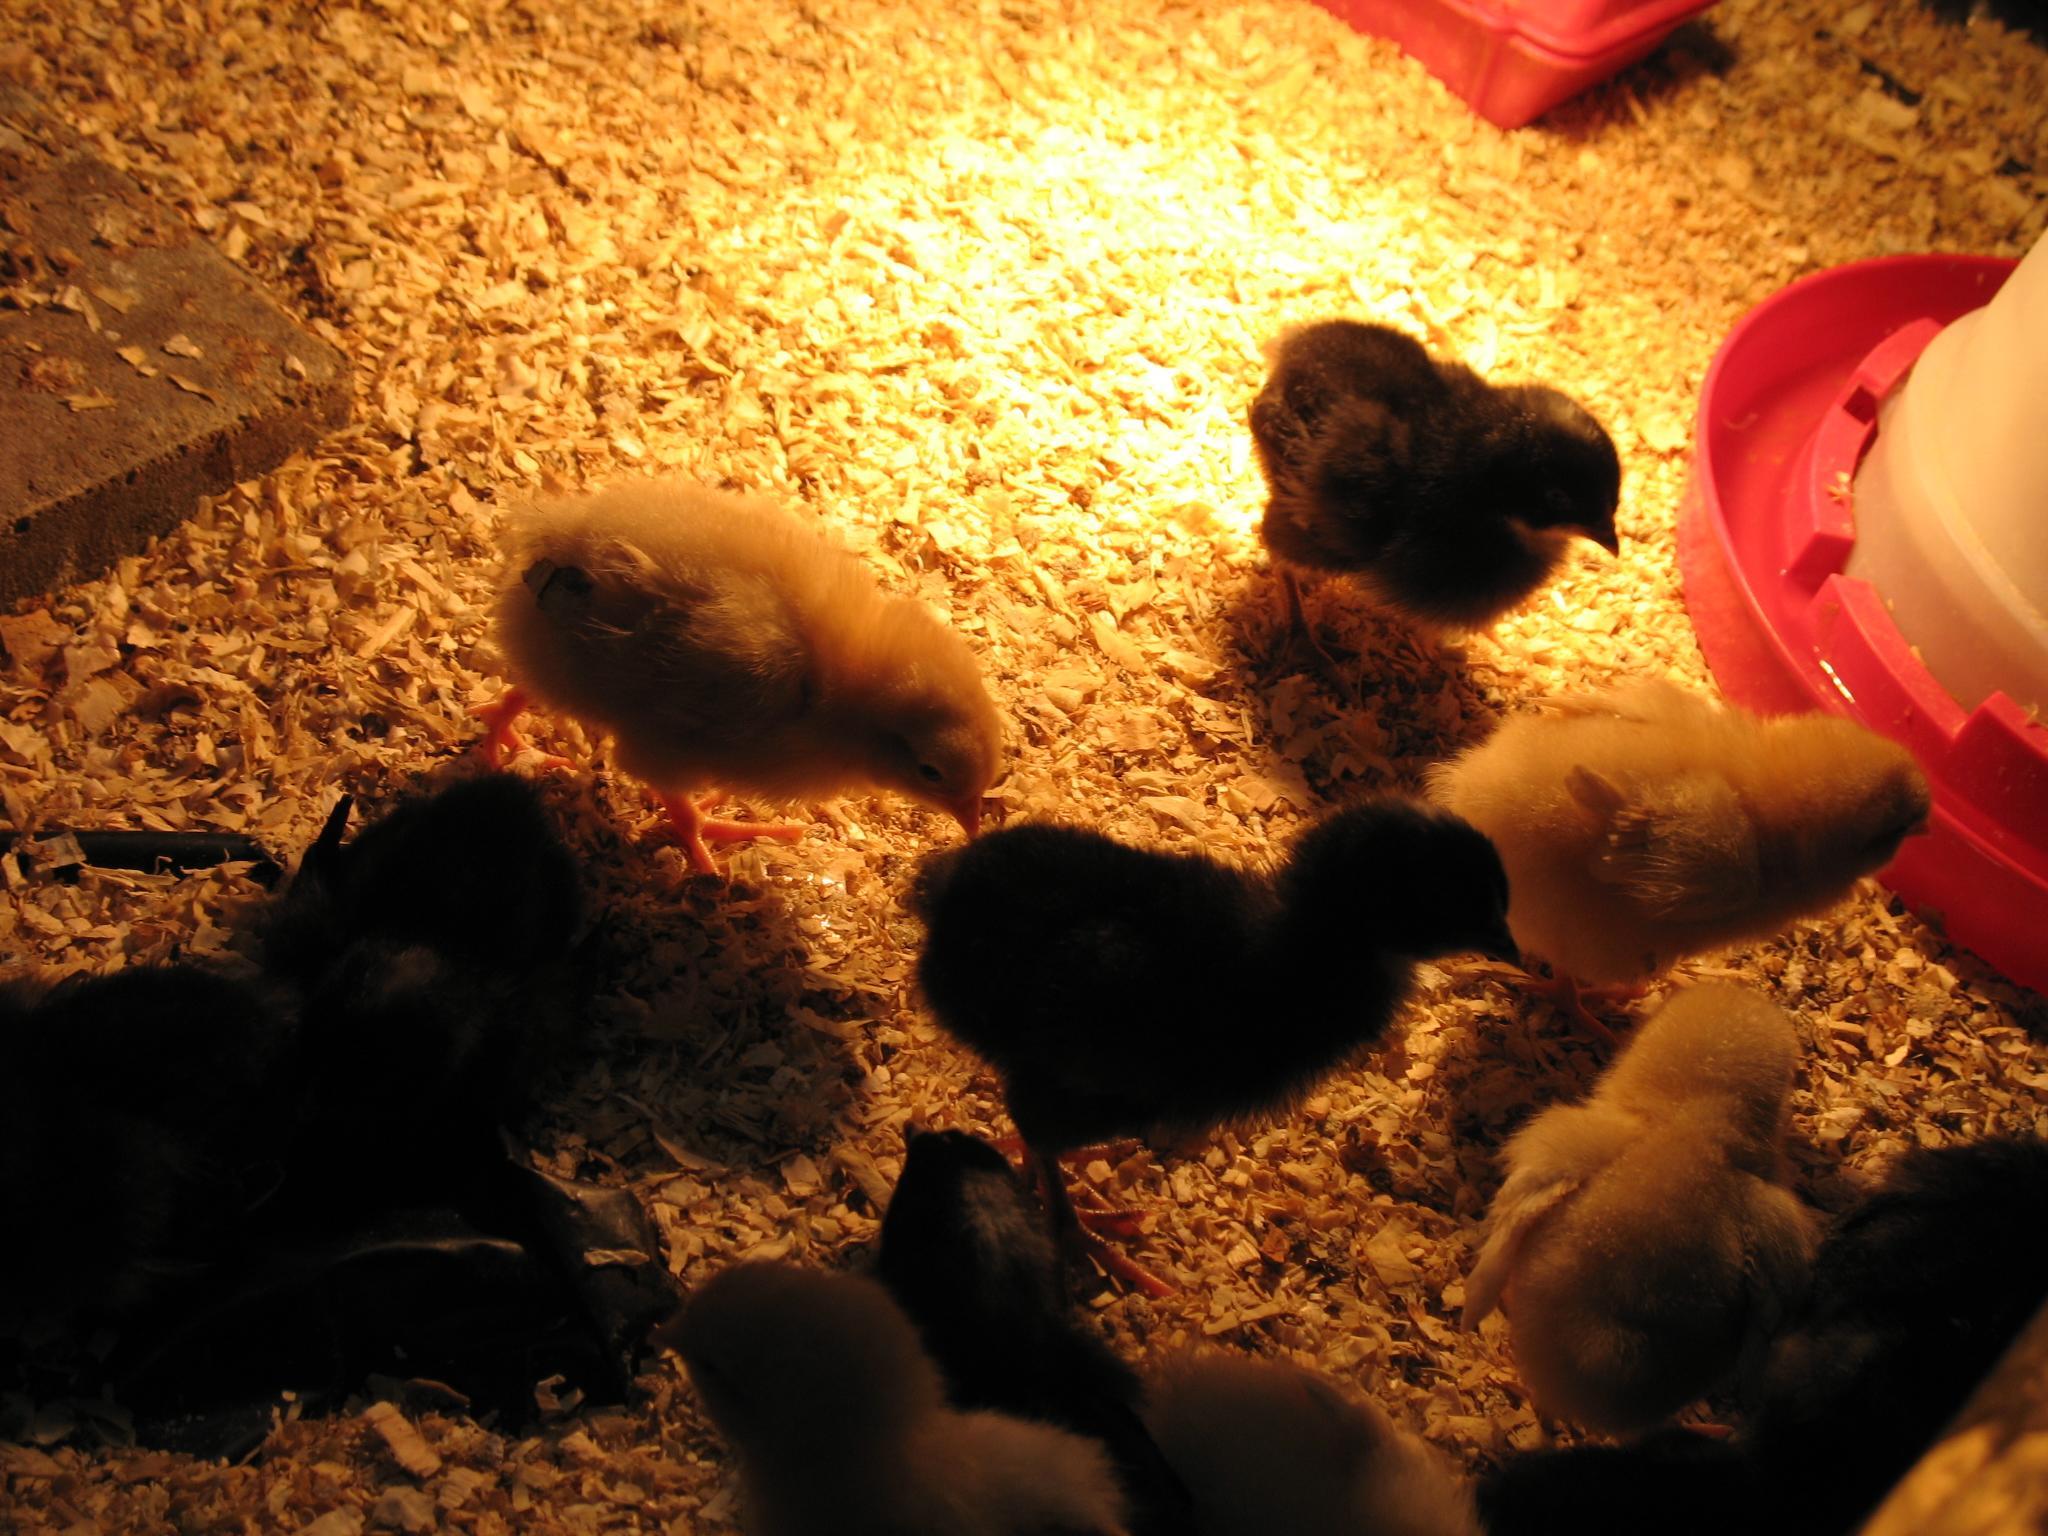 several baby chicks are huddled near their mother